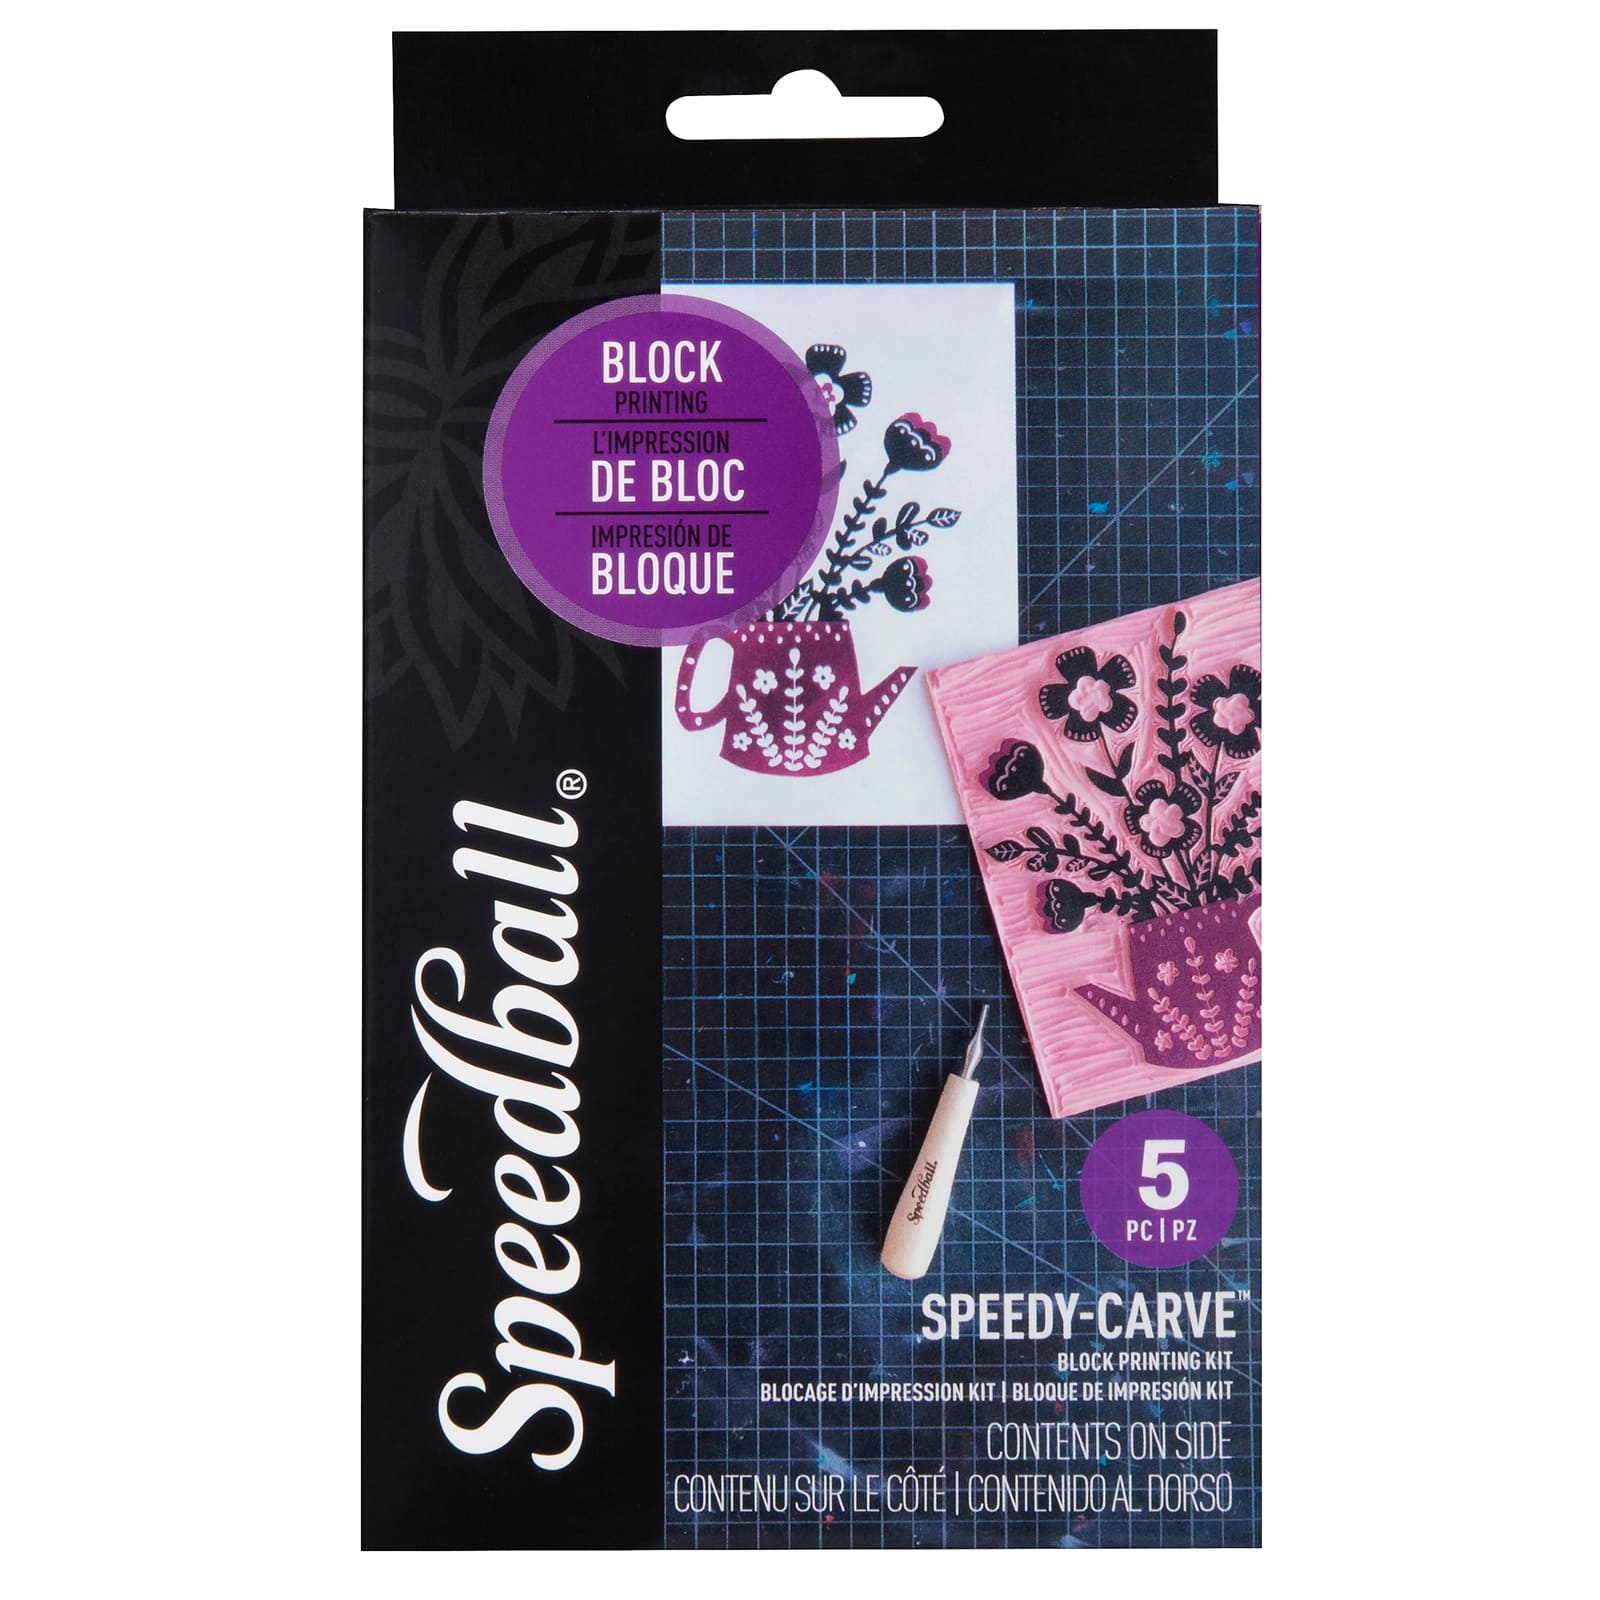 Undefined Rubber Stamp Carving Kit Refill Kit and Tools Stampin